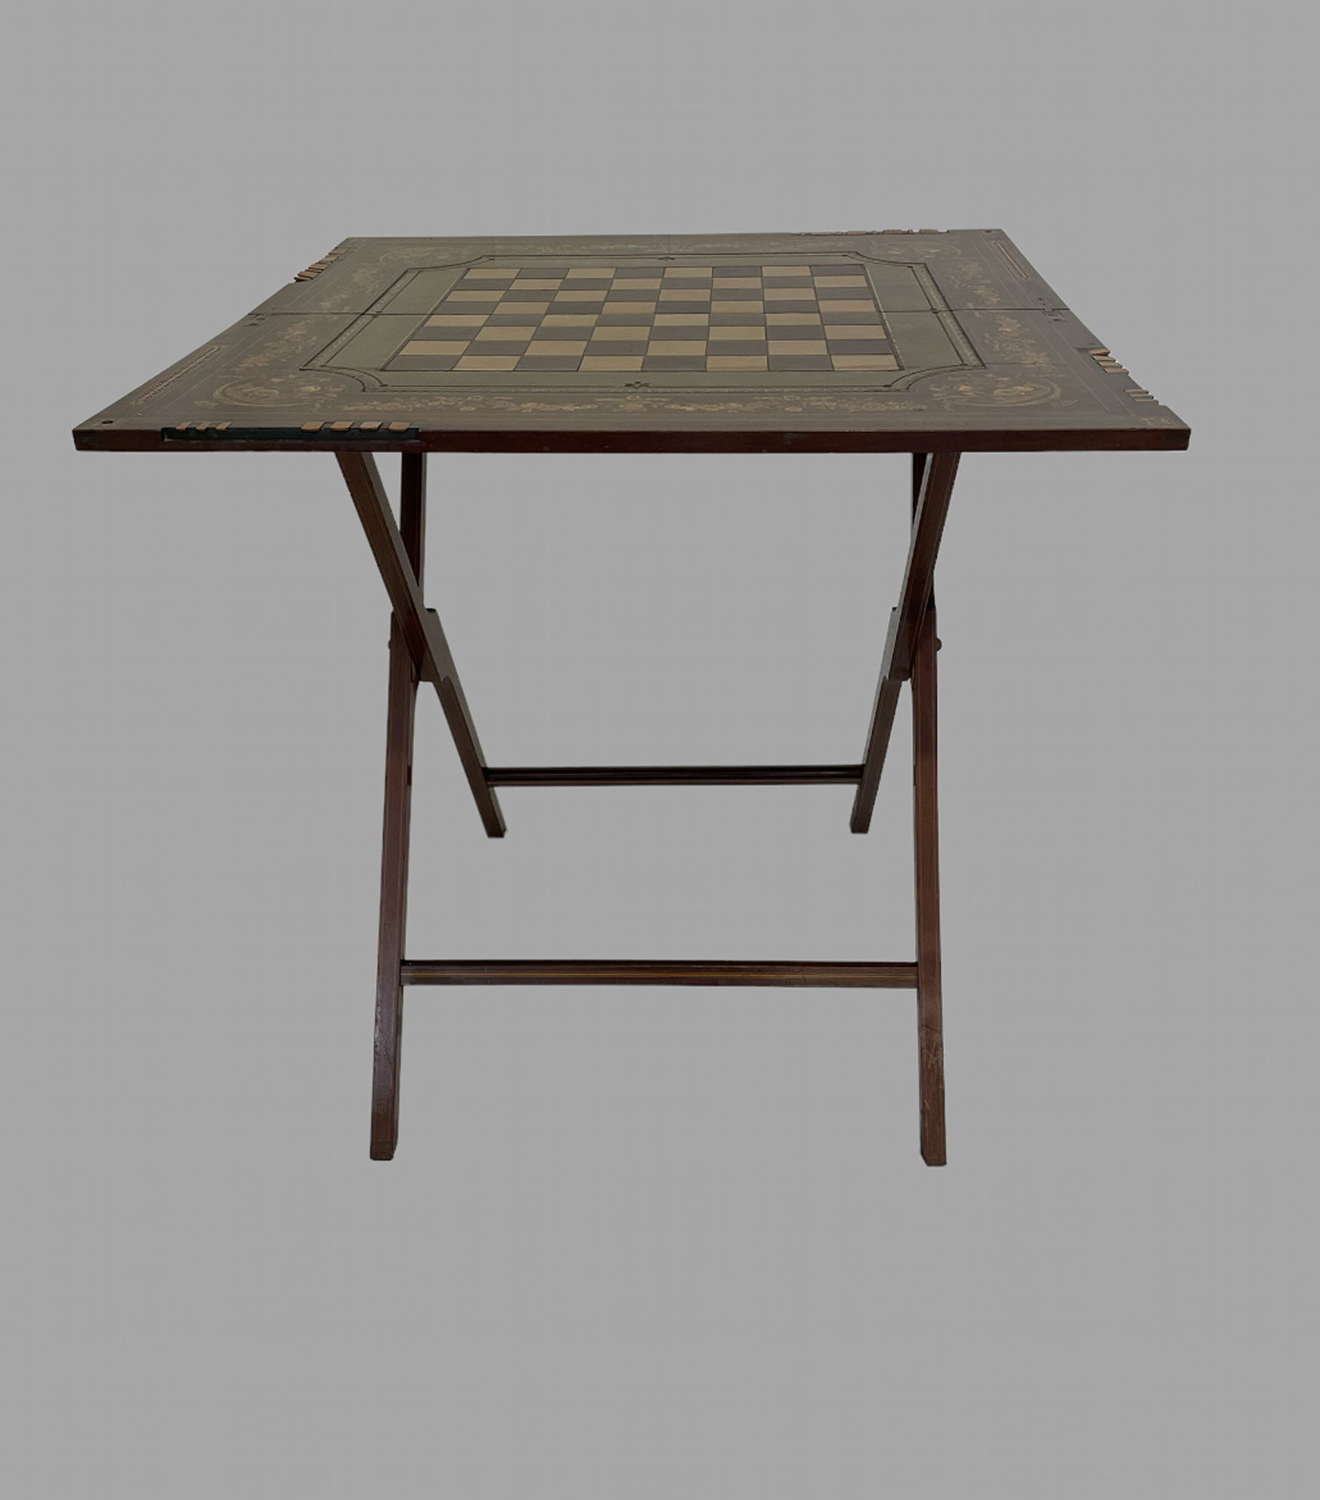 Early 20thc Games Table